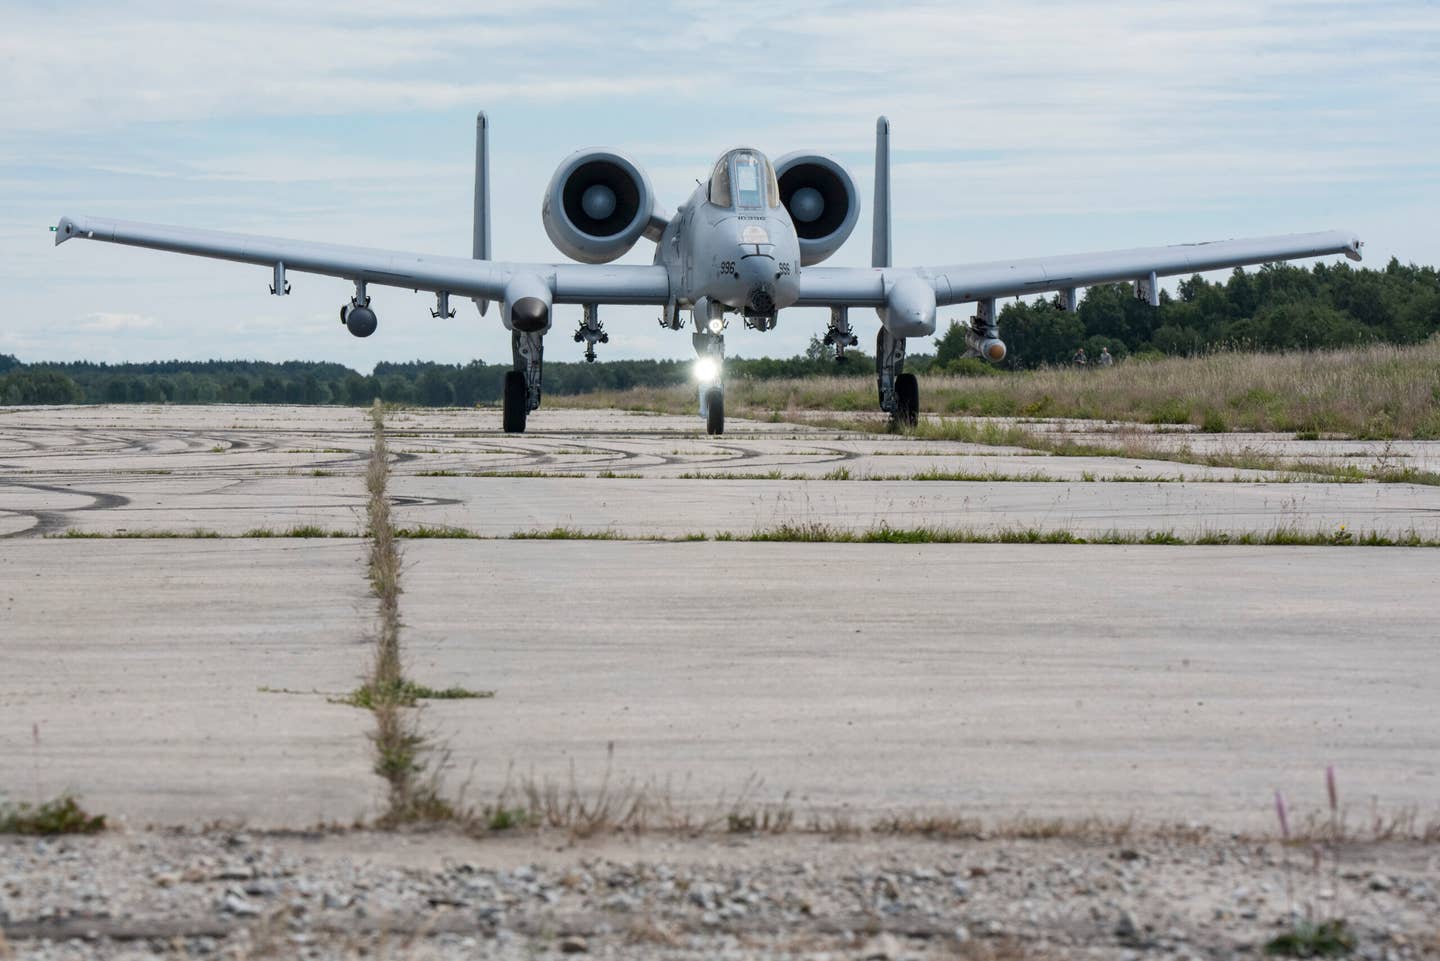 A-10s were built for austere operations, but other limitations curtail their flexibility compared to the Super Hornet. (U.S. Air National Guard photo by Staff Sgt. Bobbie Reynolds)